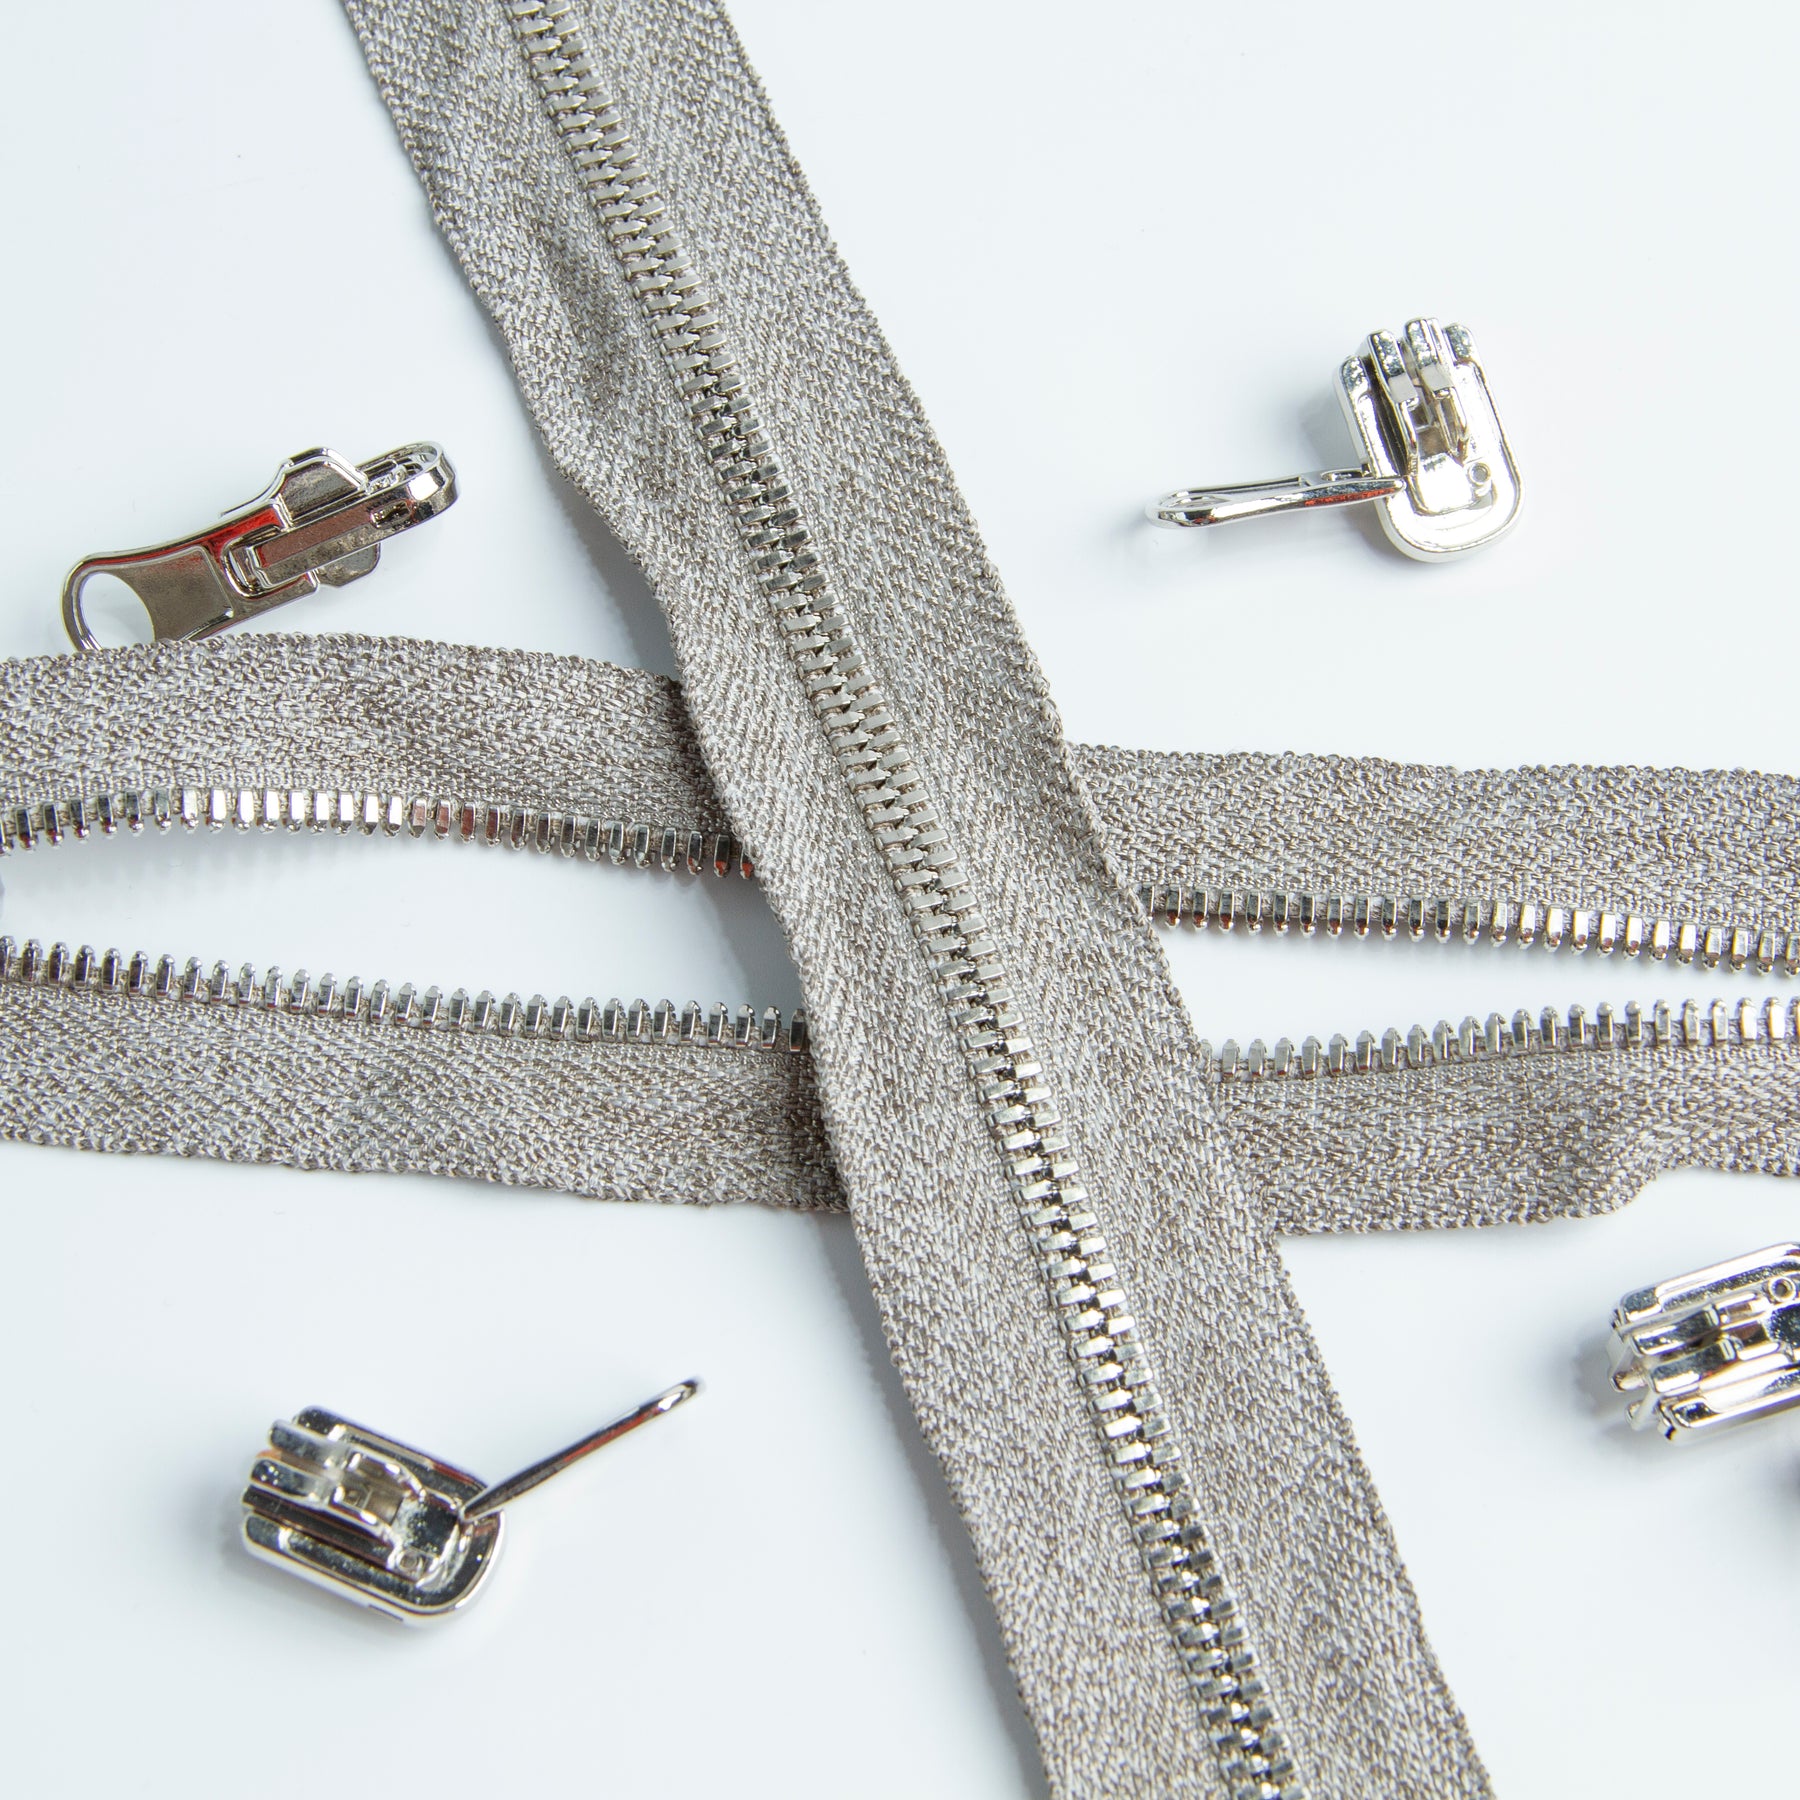 Two Silver Plated Conductive Zipper cross each other, one tape is open, the other tape is closed